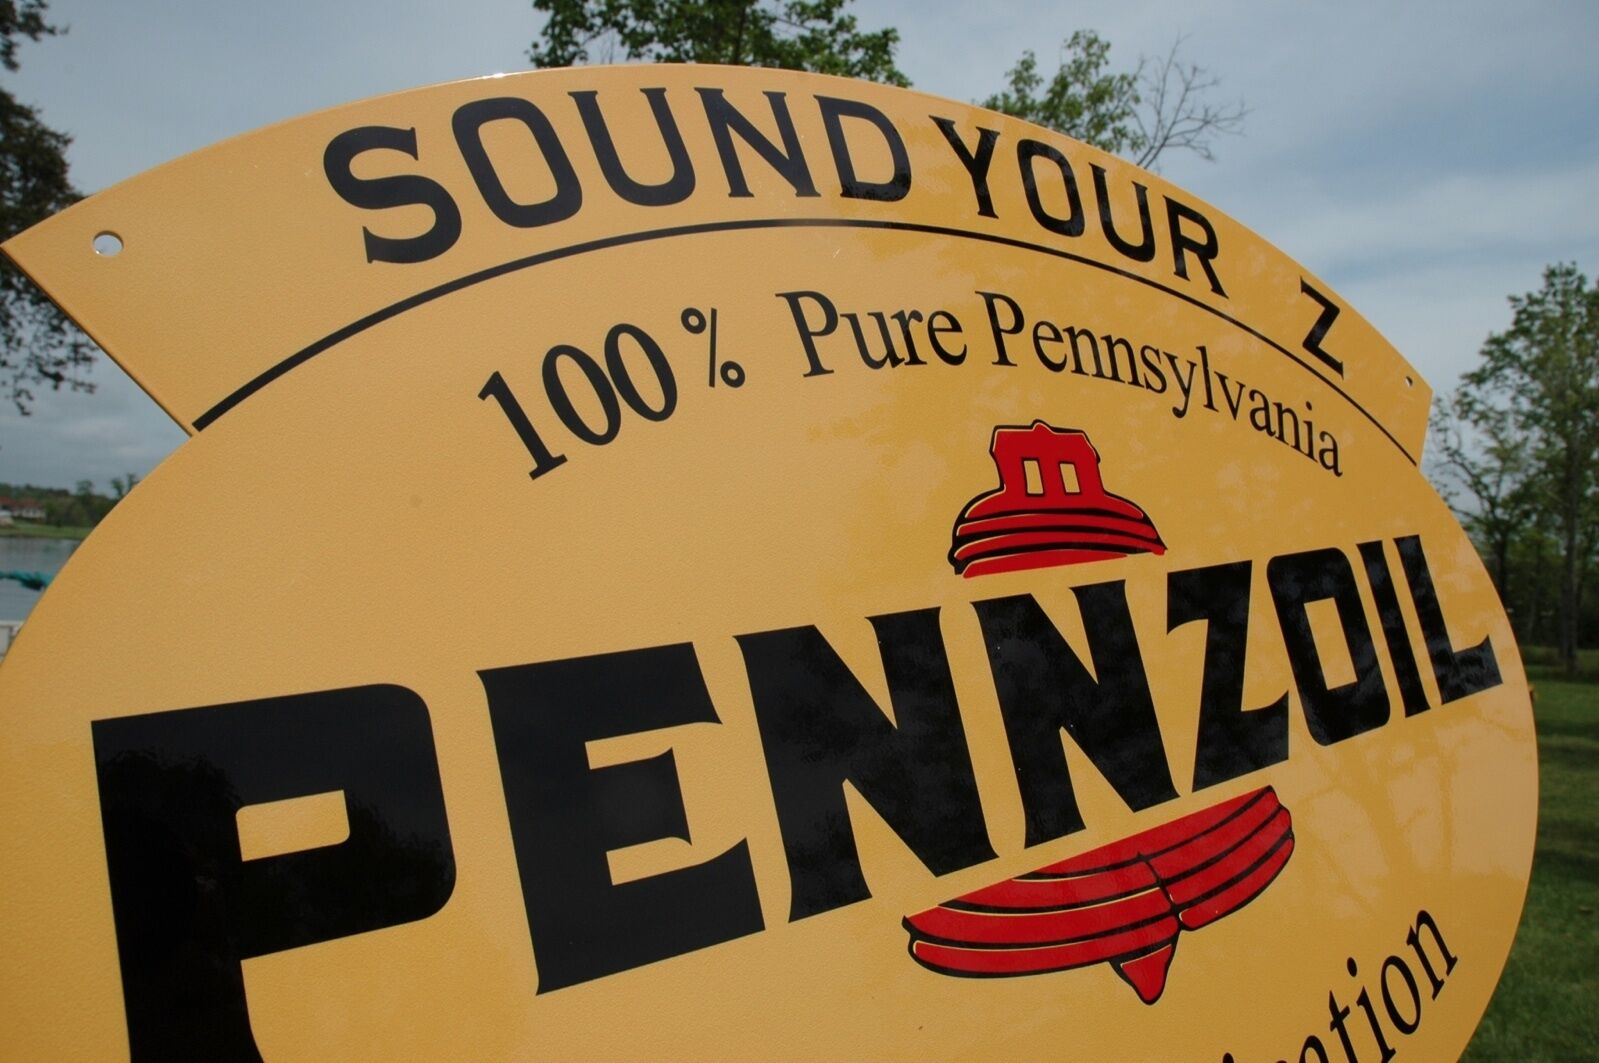 OLD STYLE PENNZOIL "SOUND YOUR Z" MOTOR OIL TWO-SIDED SWINGER SIGN MADE IN USA! Без бренда - фотография #8